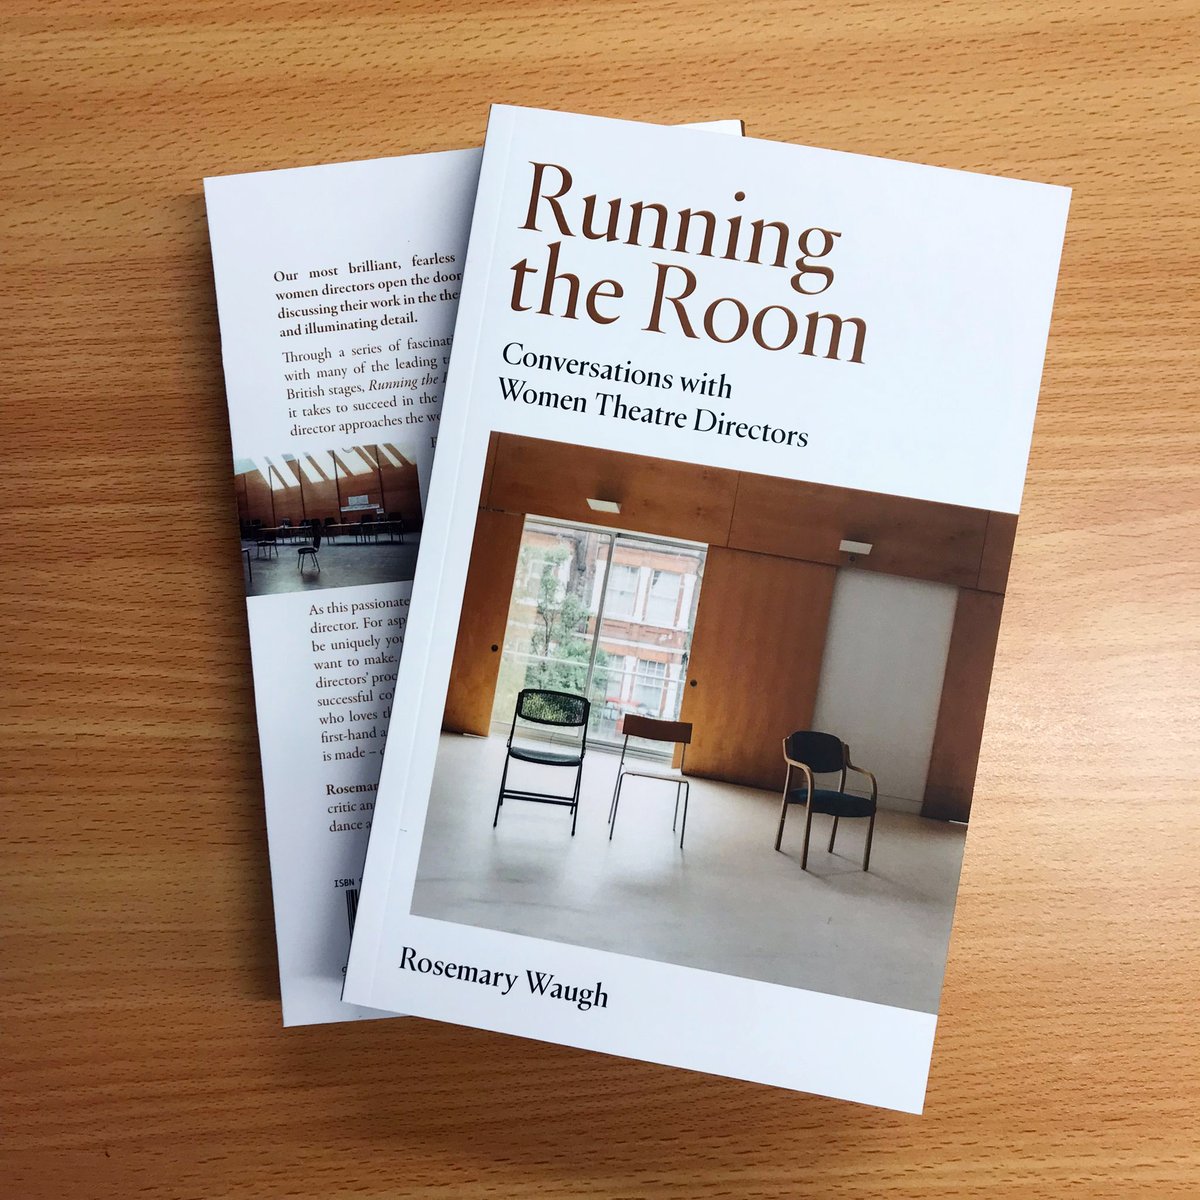 It's here – Running the Room: Conversations with Women Theatre Directors by Rosemary Waugh. Published next week on 16 November, this is an unparalleled first-hand account of how brilliant theatre is made – direct from those making it. Pre-order here: nickhernbooks.co.uk/running-the-ro…